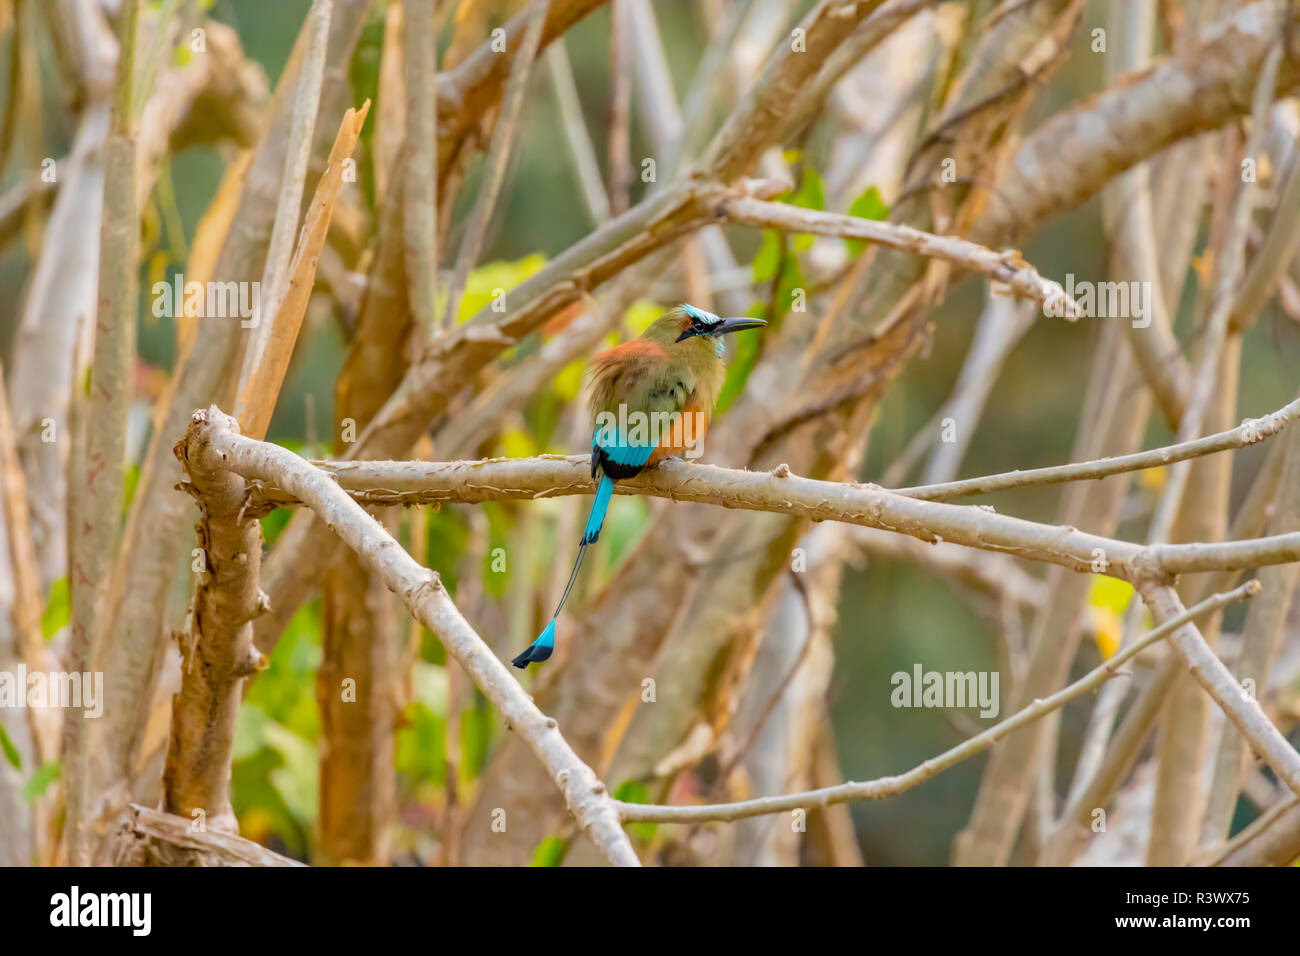 Central America, Costa Rica. Lesson's motmot bird in tree. Credit as: Fred Lord / Jaynes Gallery / DanitaDelimont.com Stock Photo